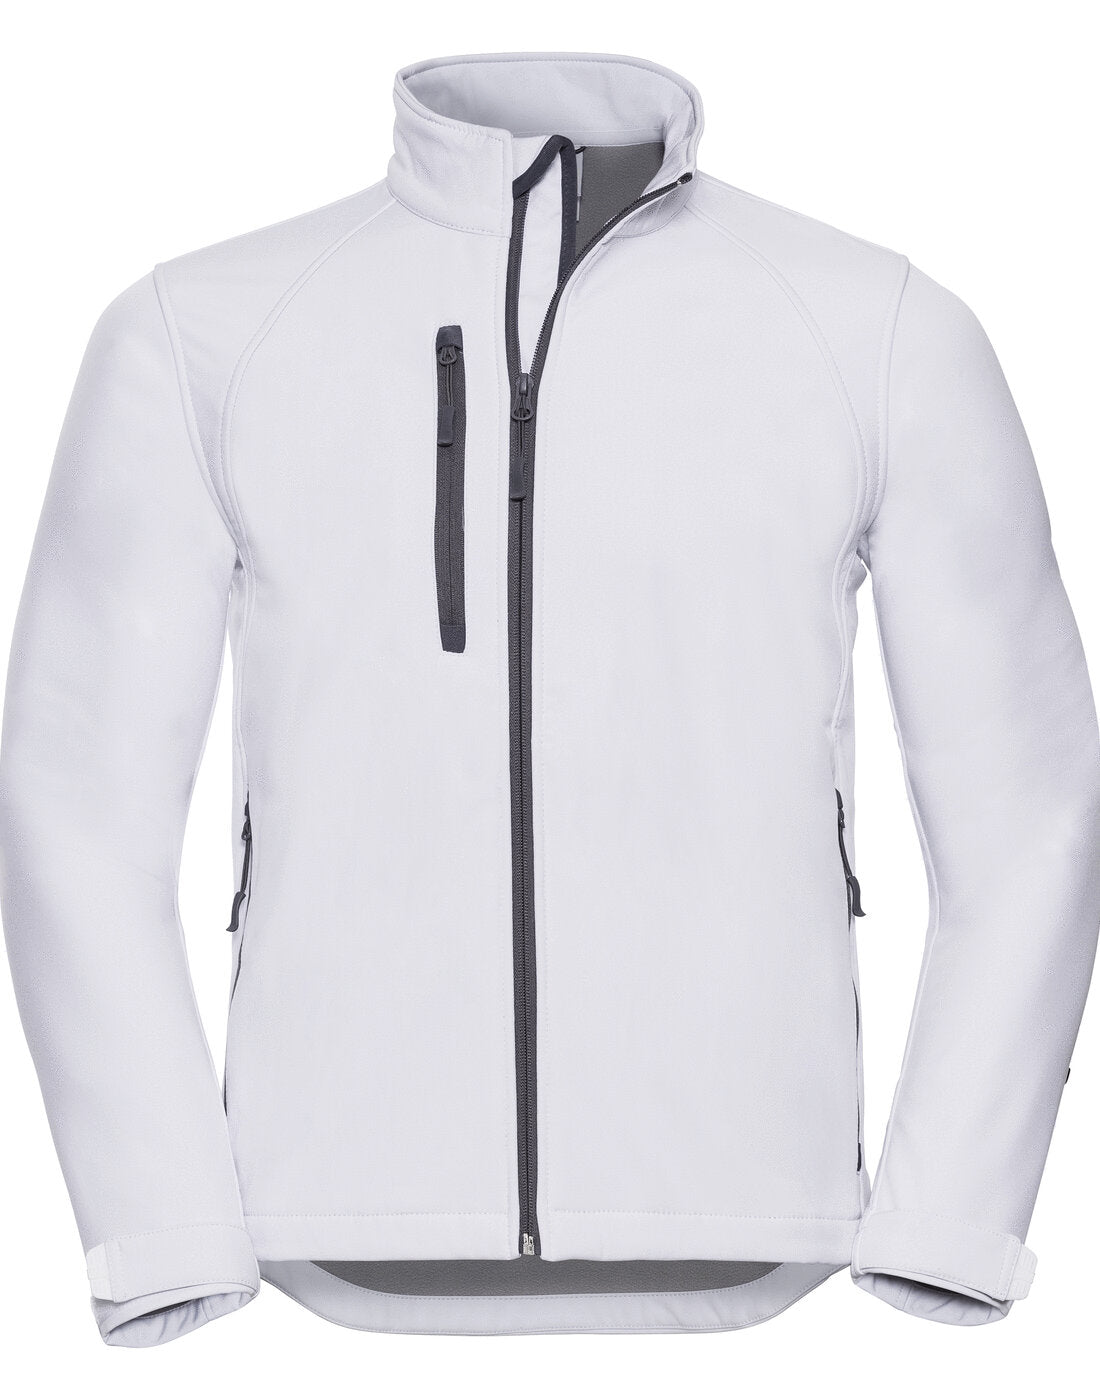 Russell Mens Softshell Jacket - White